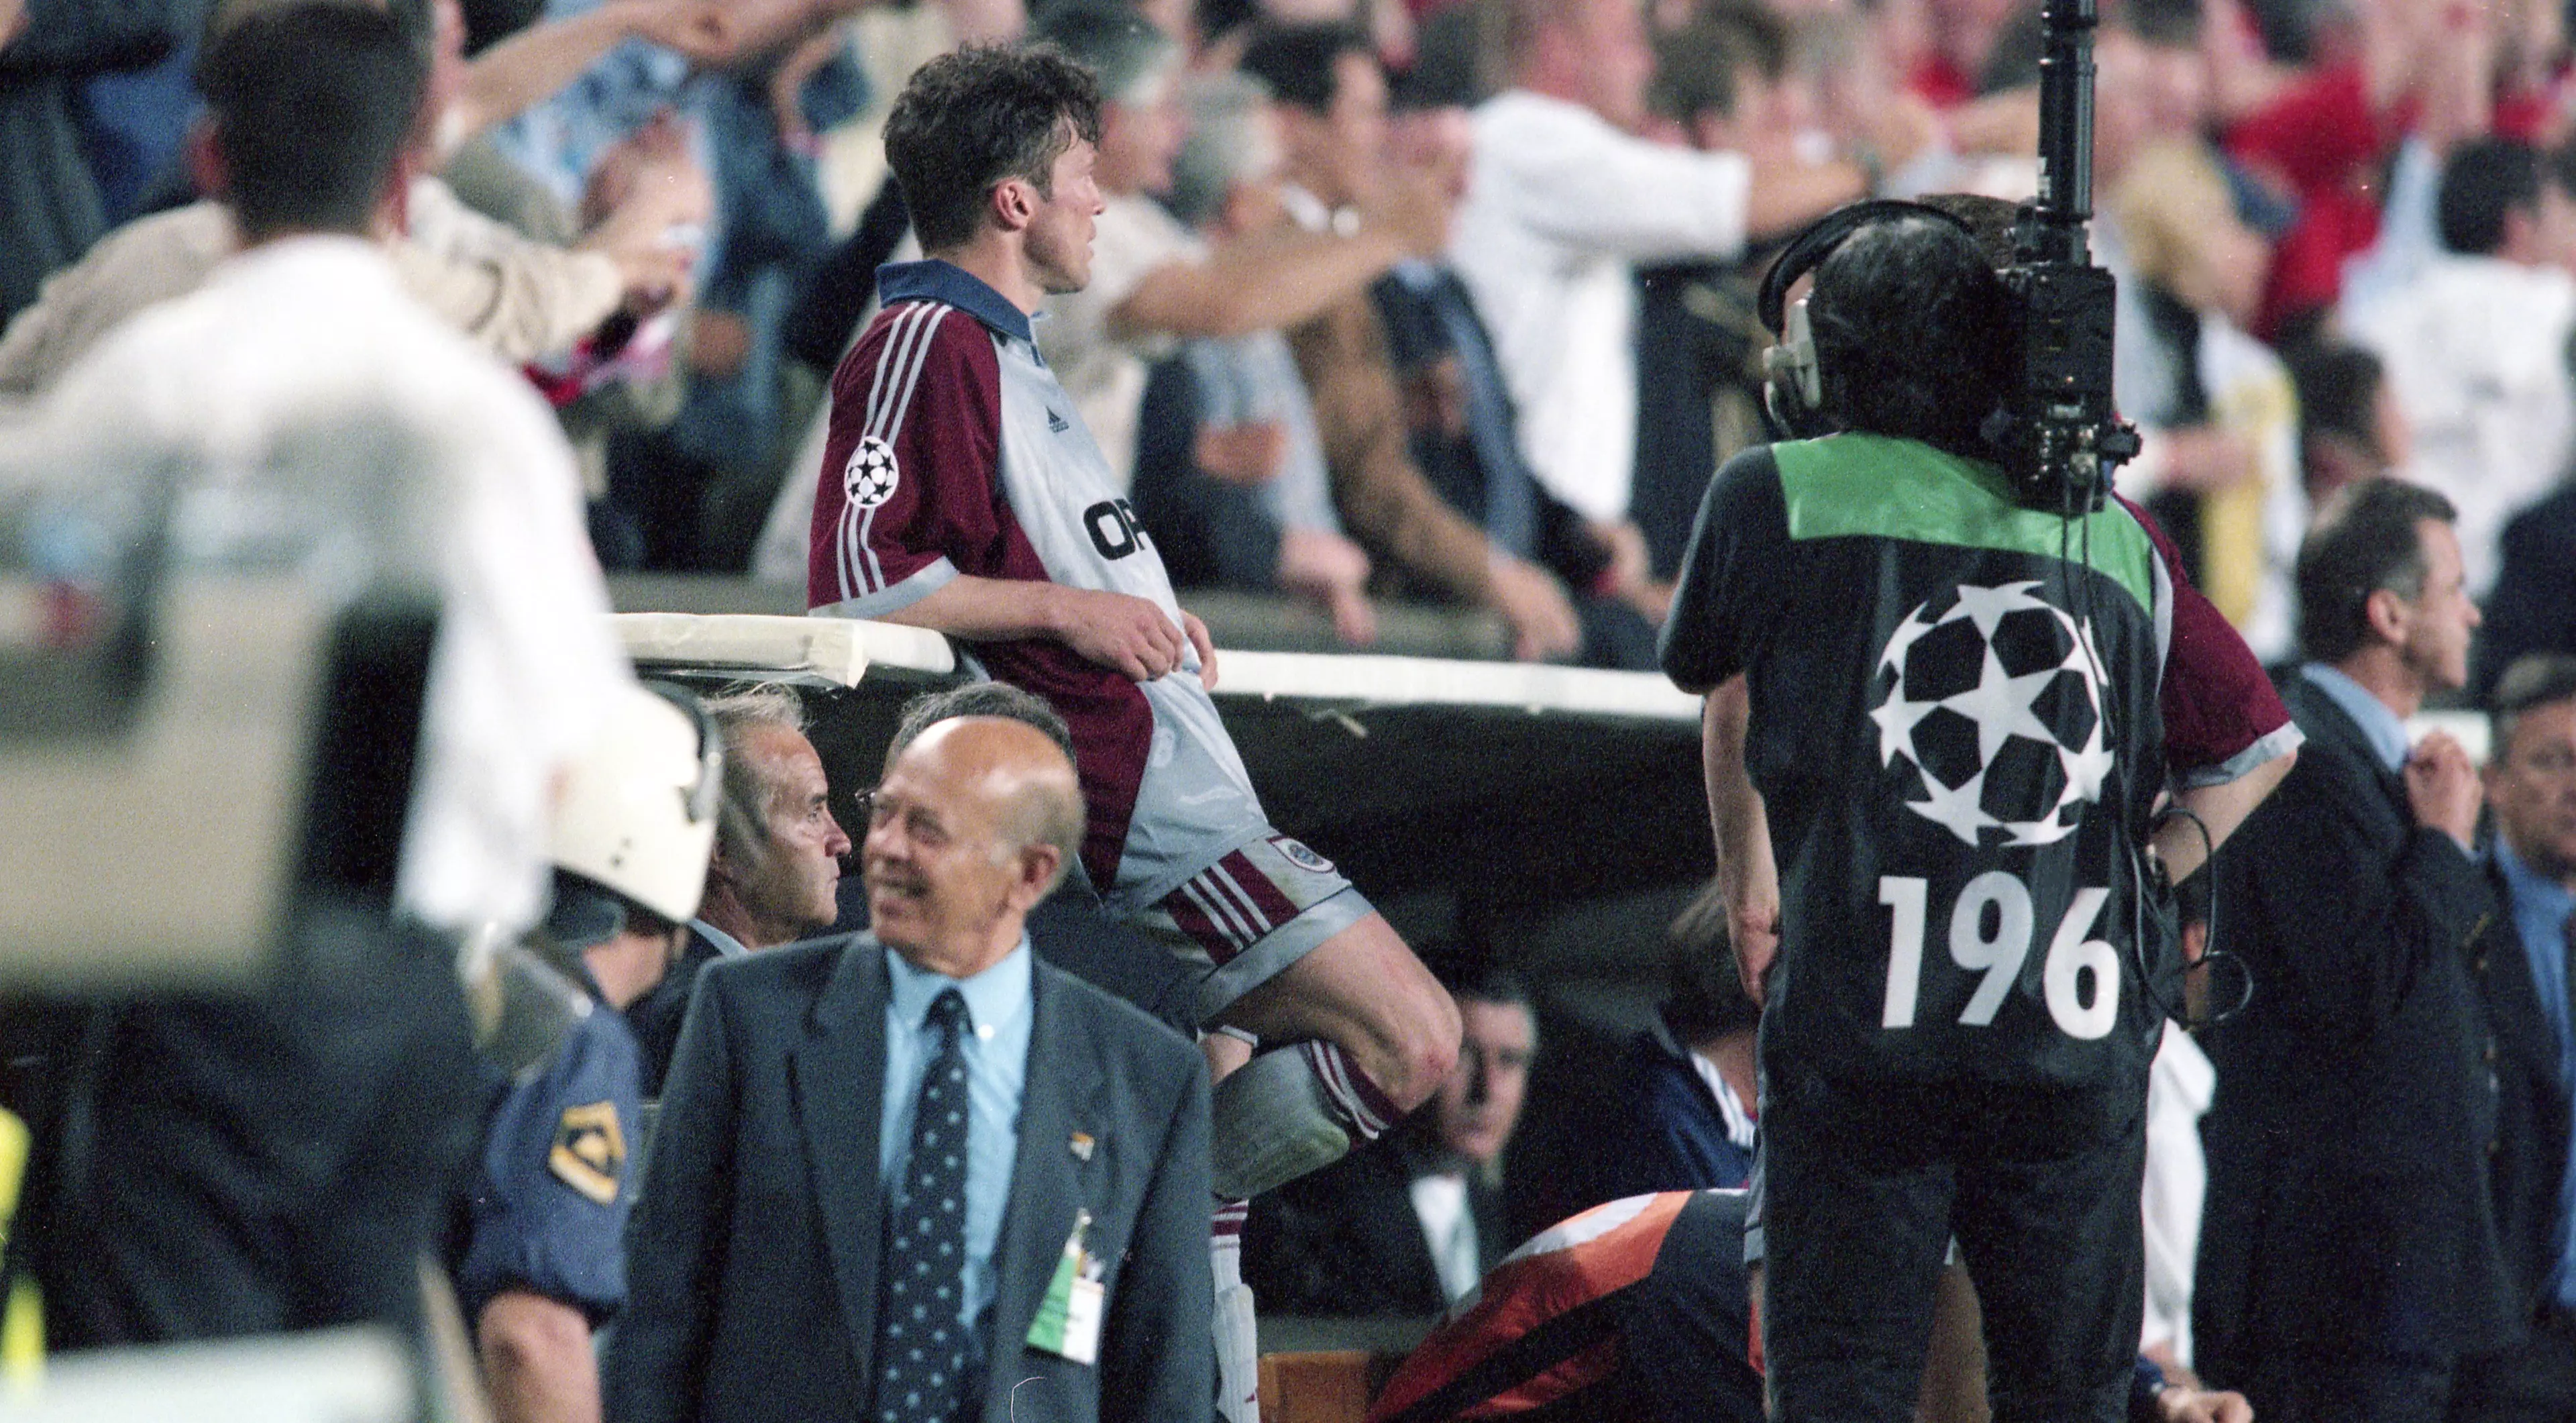 Matthäus, who'd won everything in his career apart from the Champions League, had been replaced. Image: PA Images